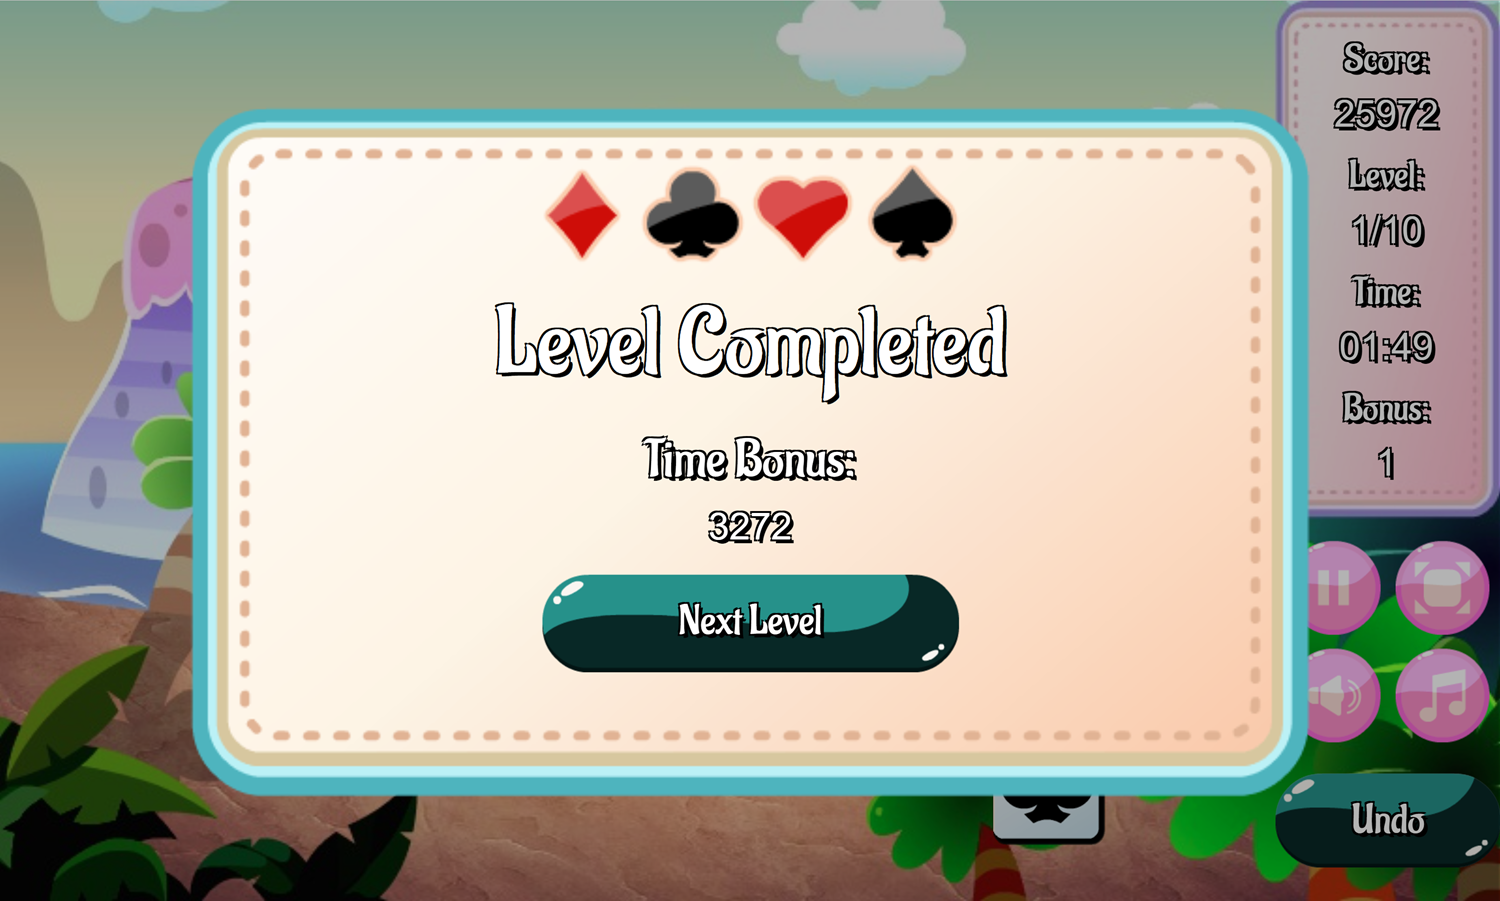 Mountain Solitaire Game Level Completed Screen Screenshot.